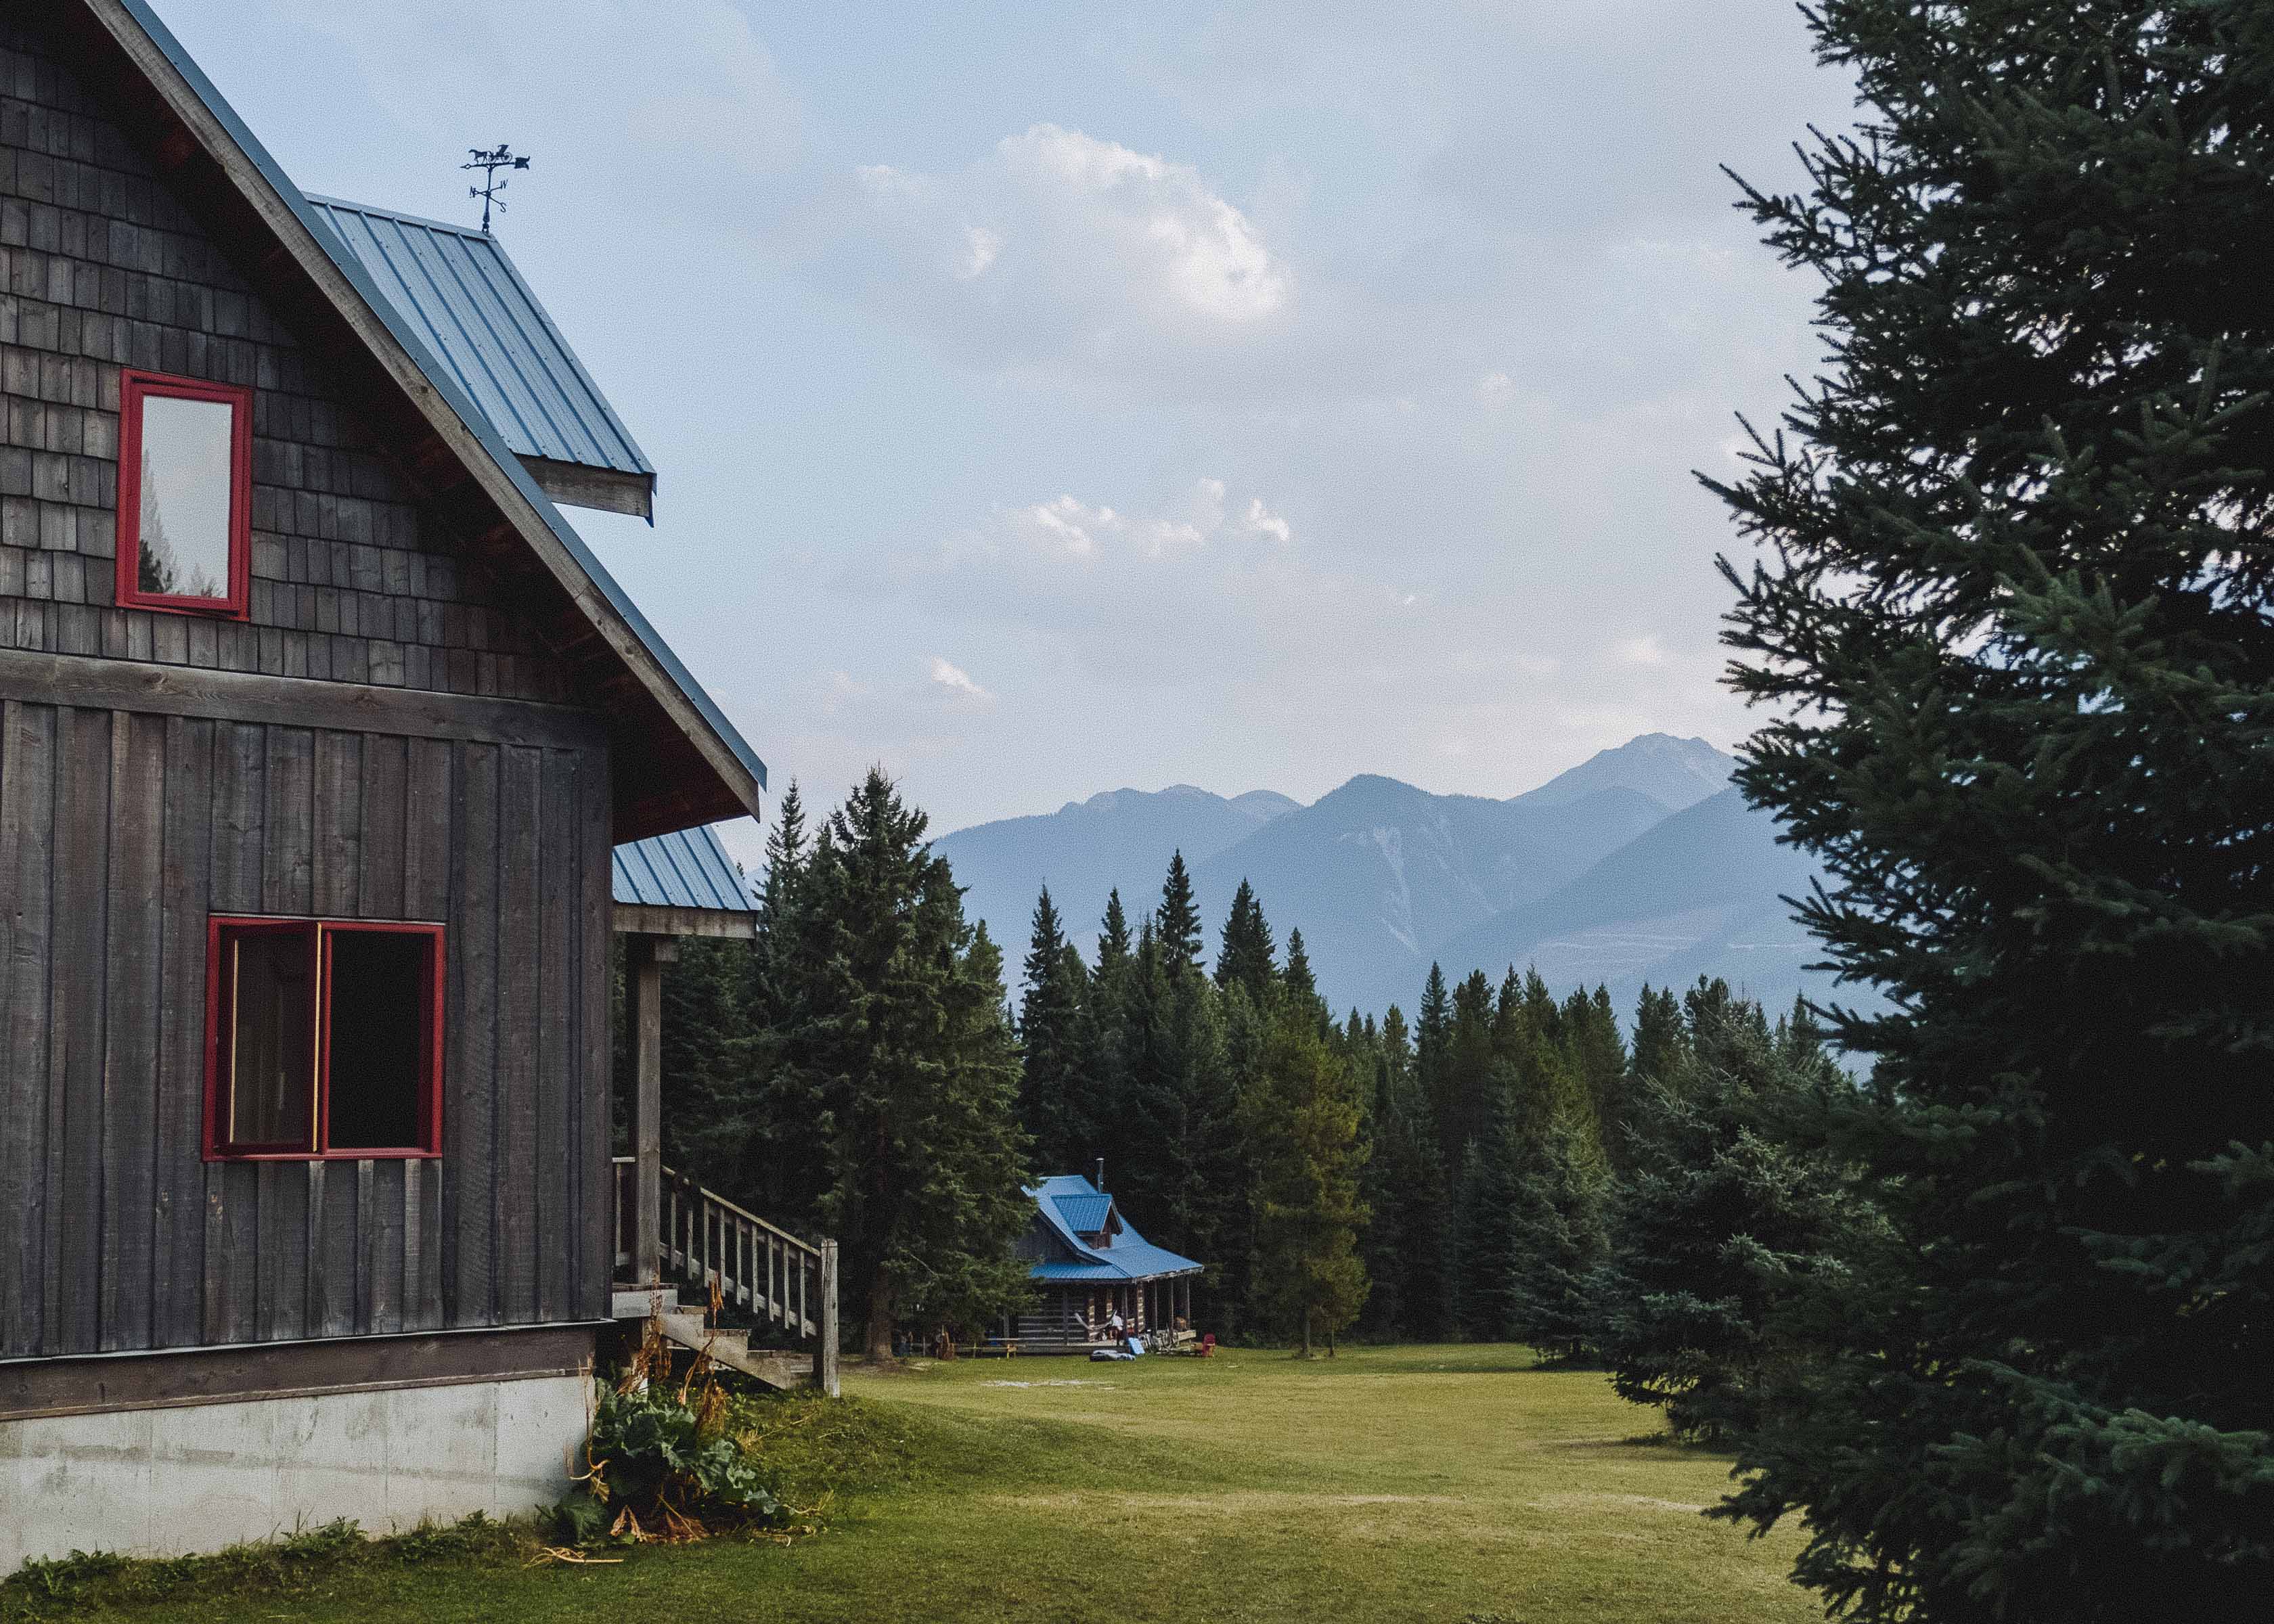 Cozy cabins in the Kootenay Mountains